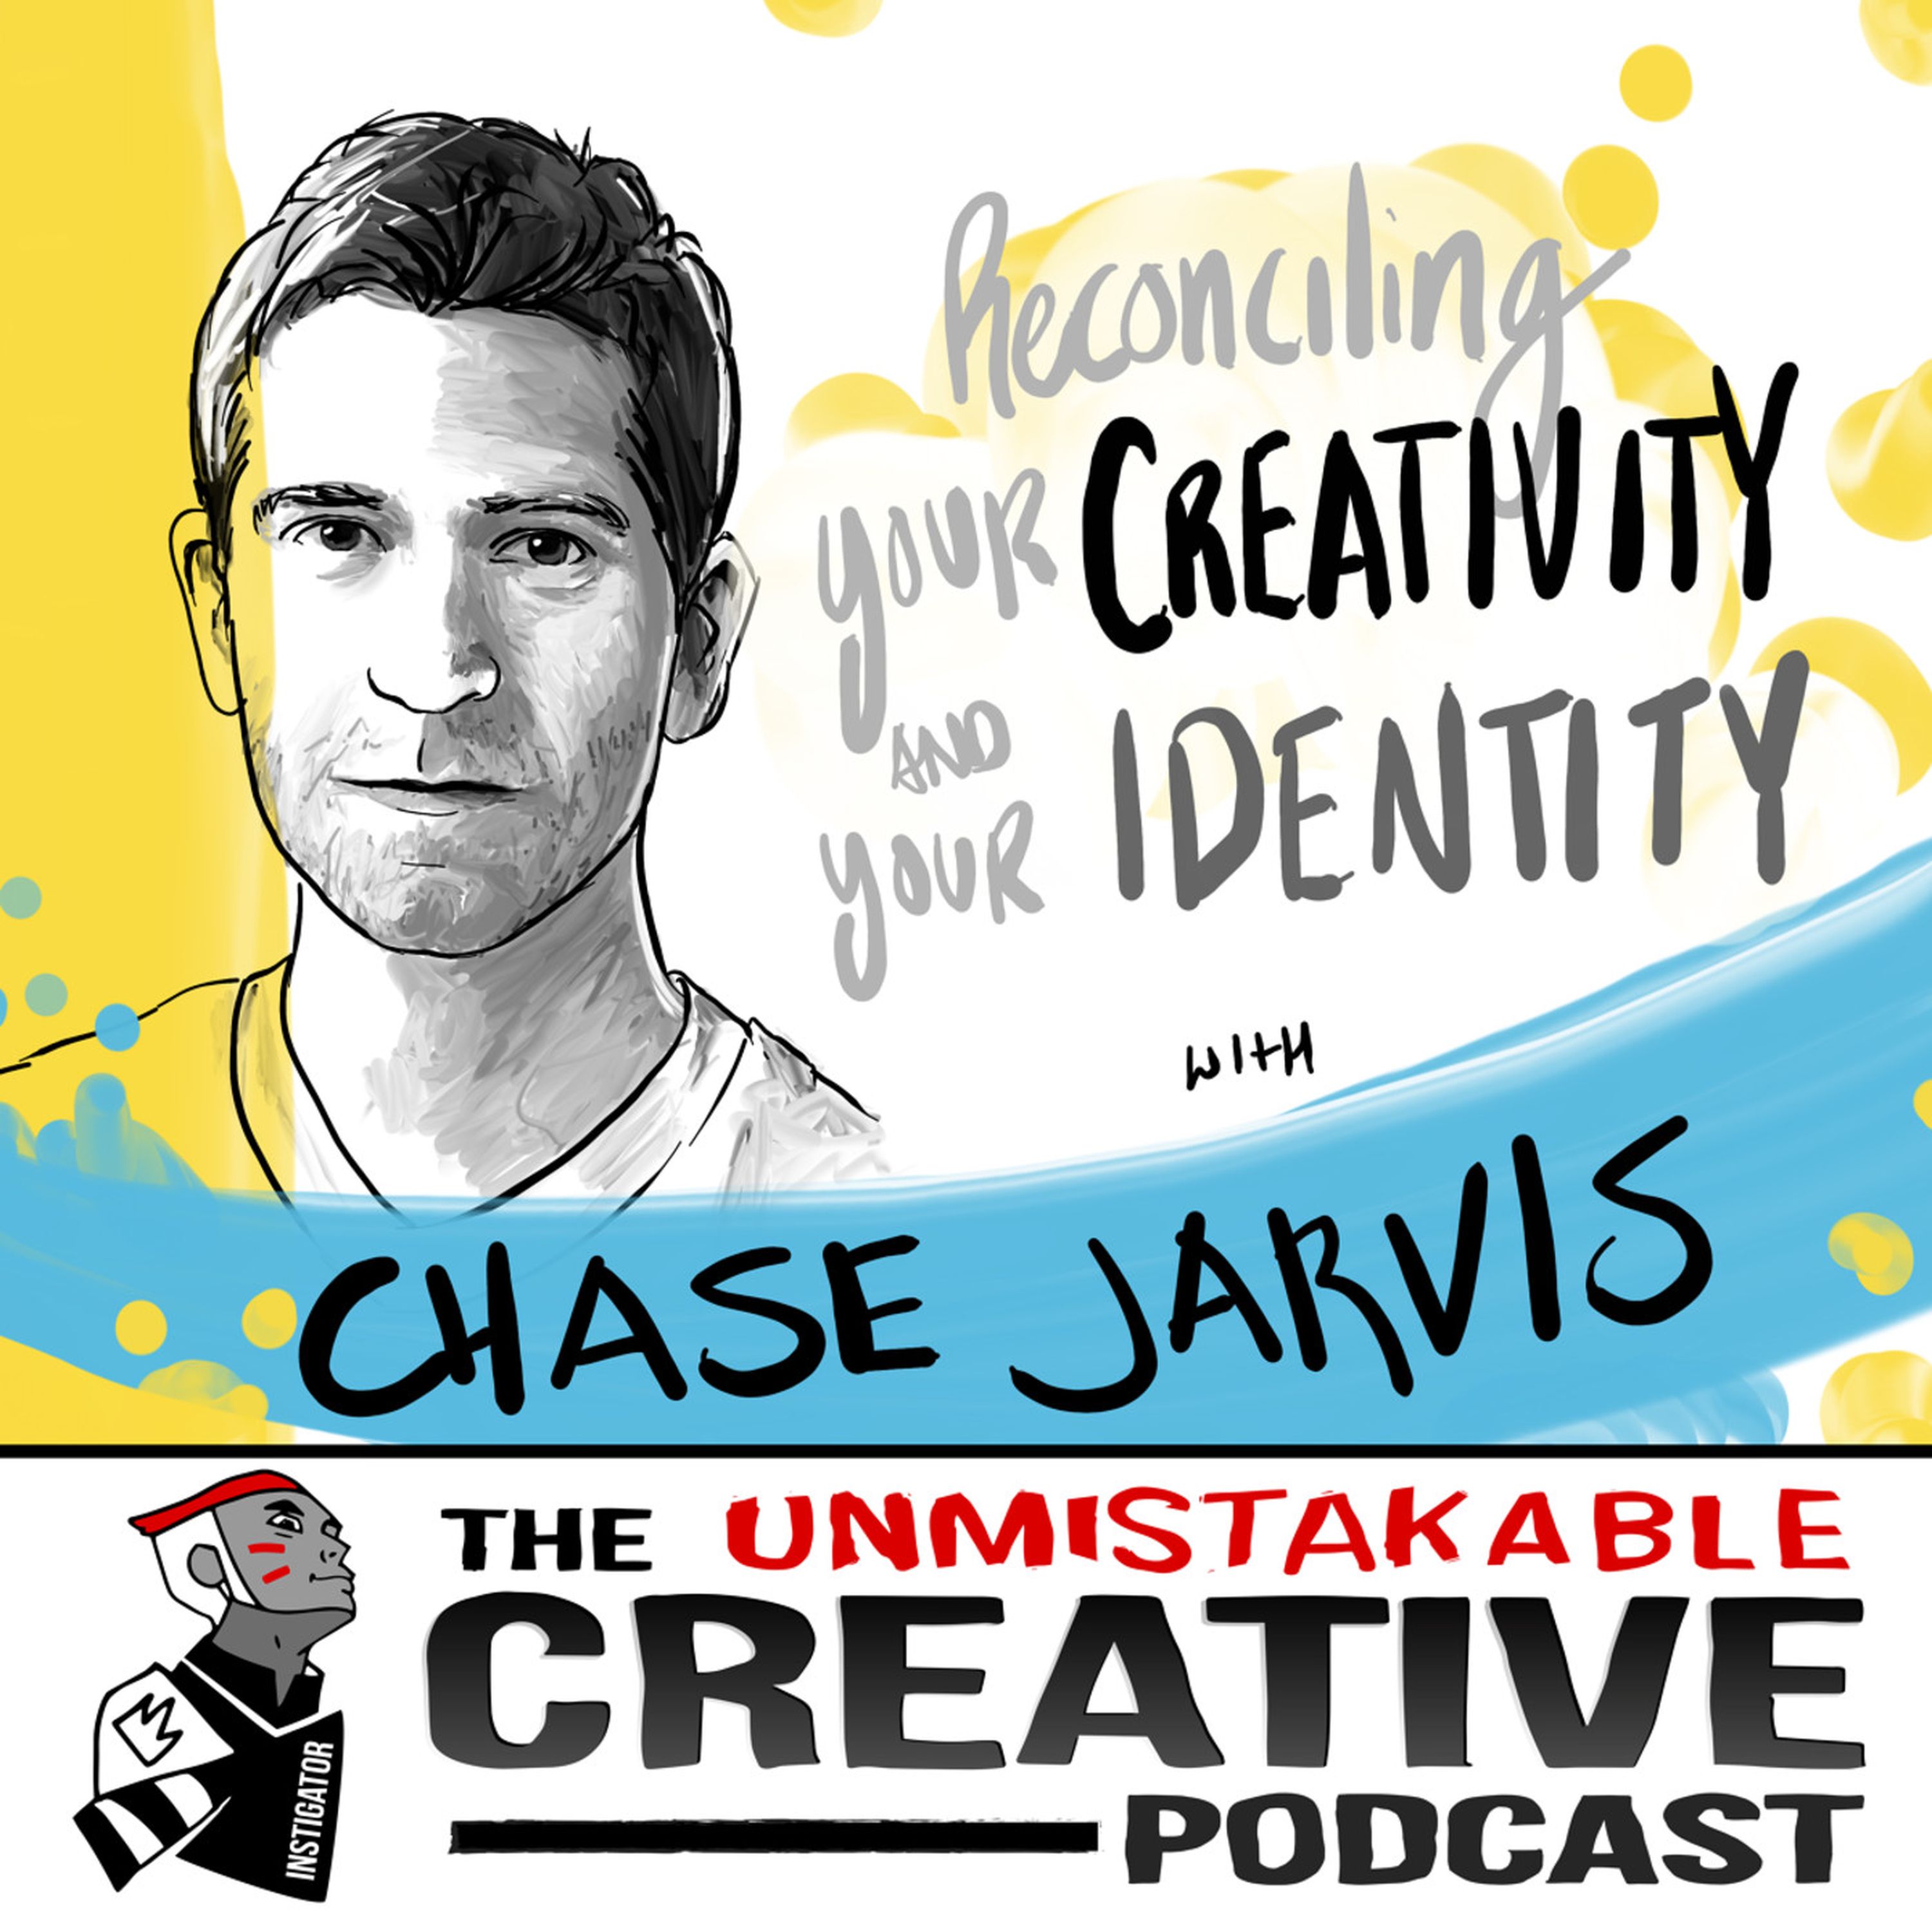 Reconciling Your Creativity and Your Identity with Chase Jarvis